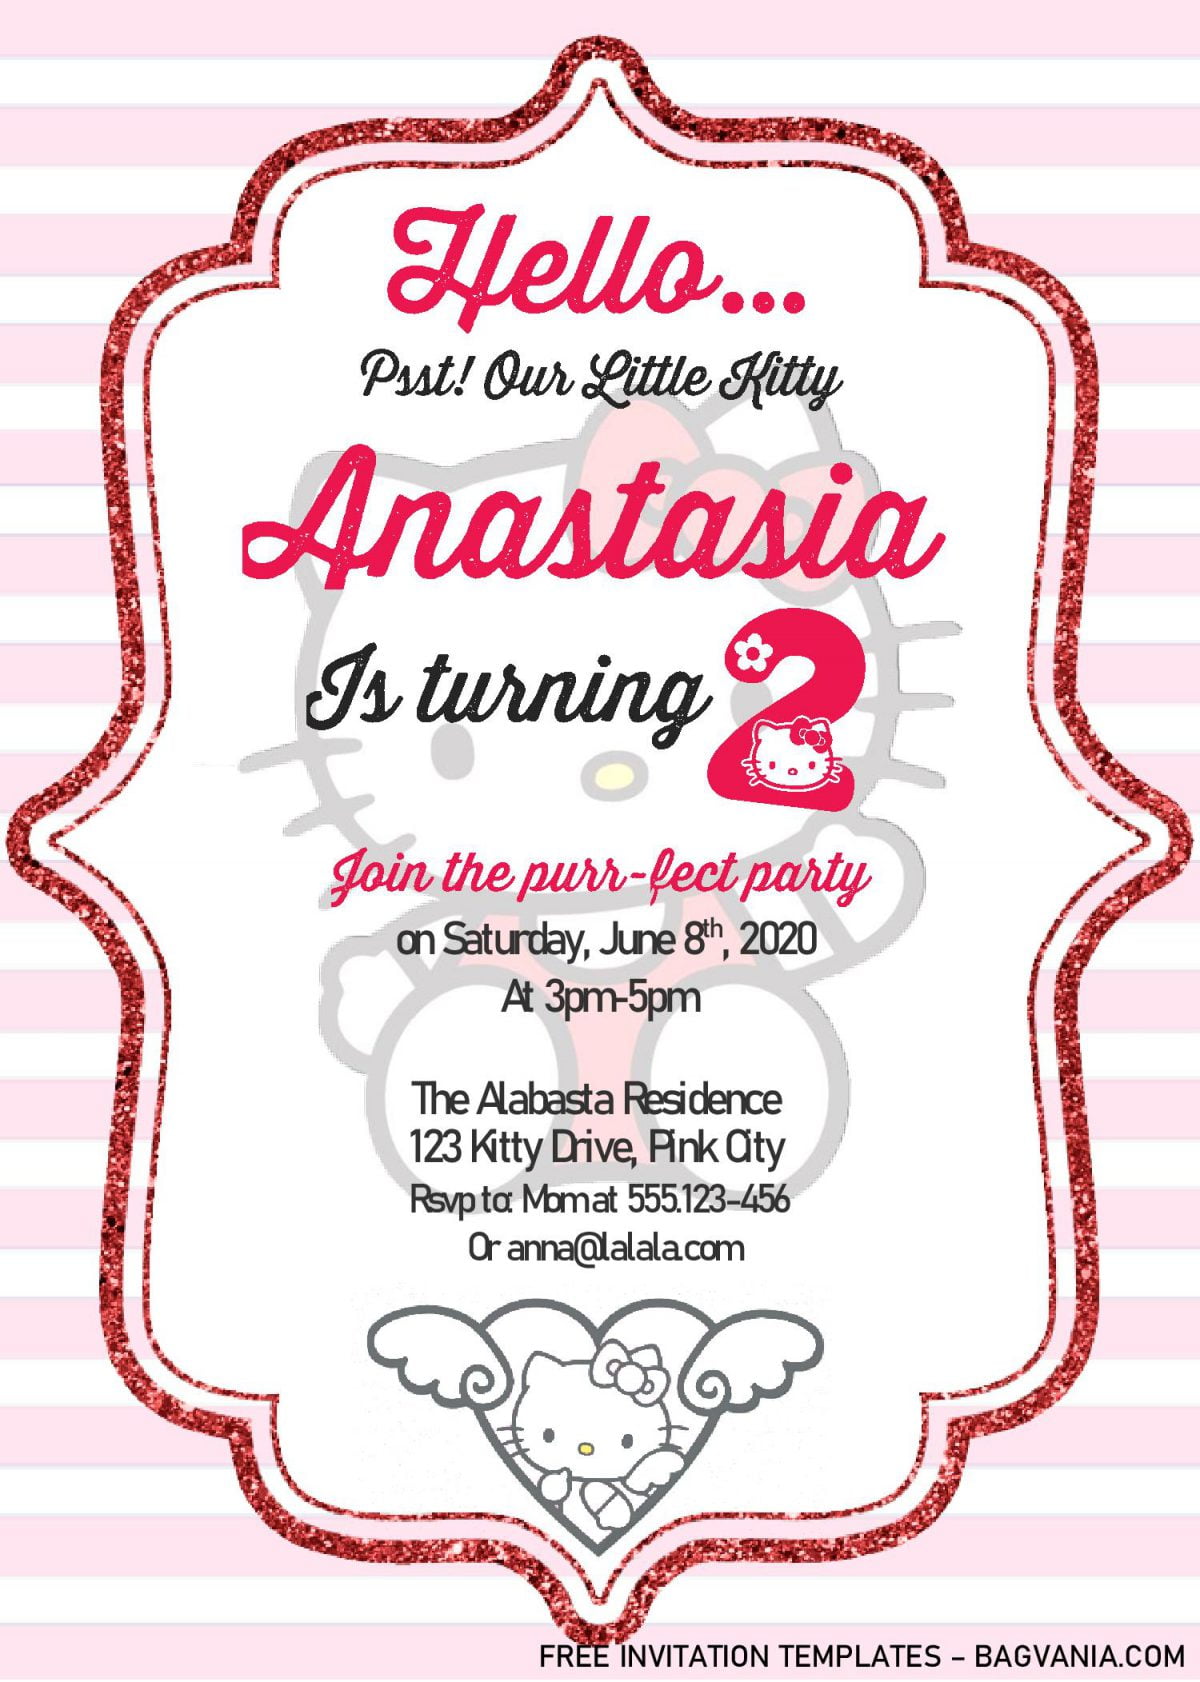 Hello Kitty Invitation Templates - Editable With MS Word and has Pink bracket frame